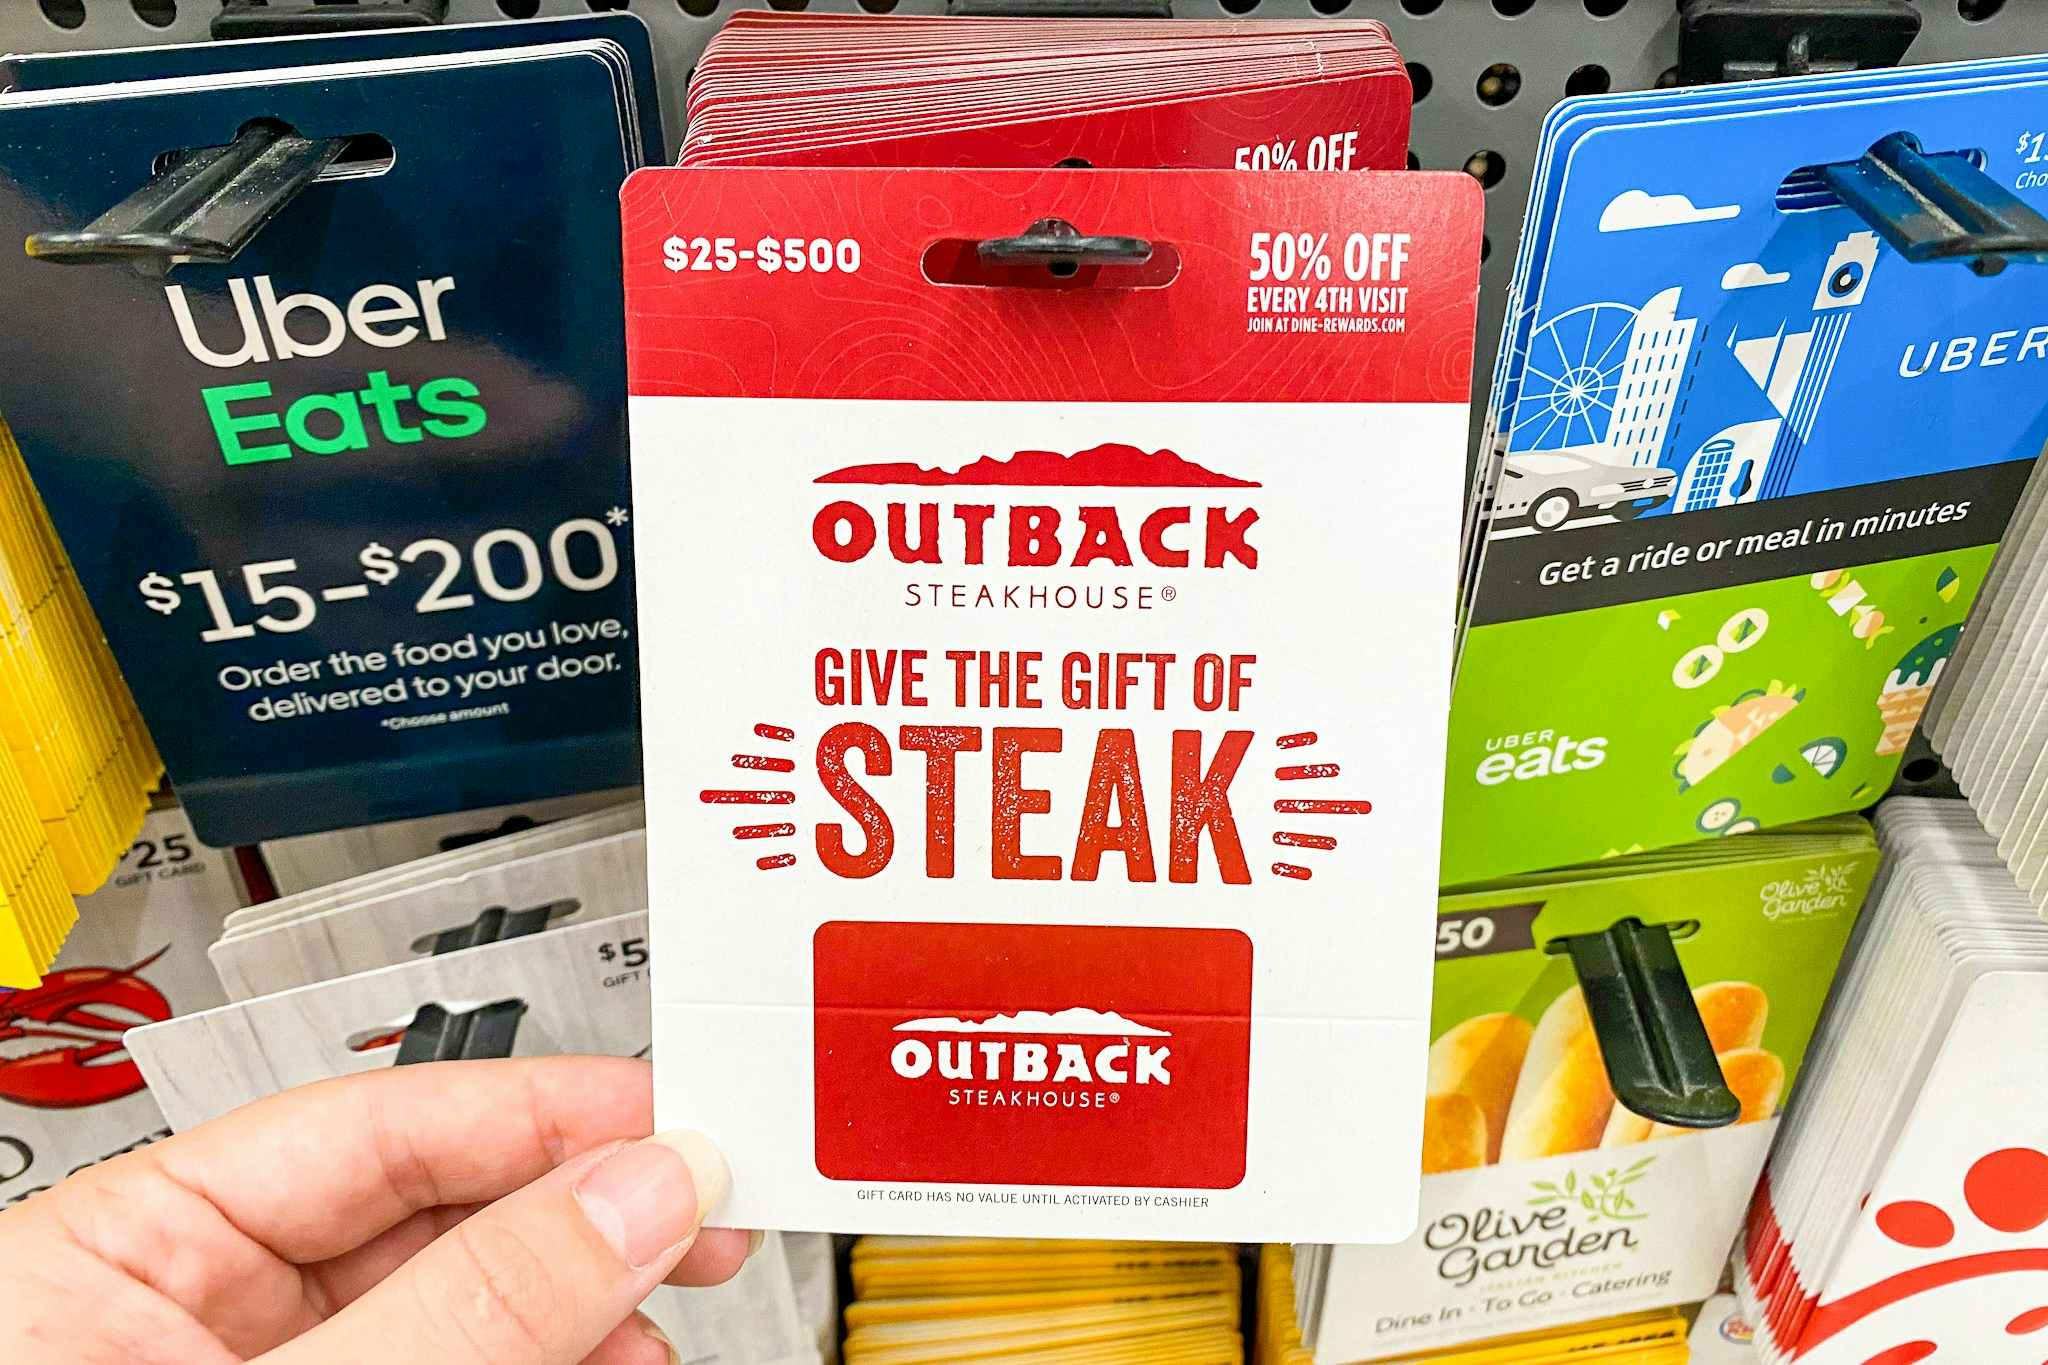 A person's hand taking an Outback Steakhouse gift card from a display of gift cards at Walmart.